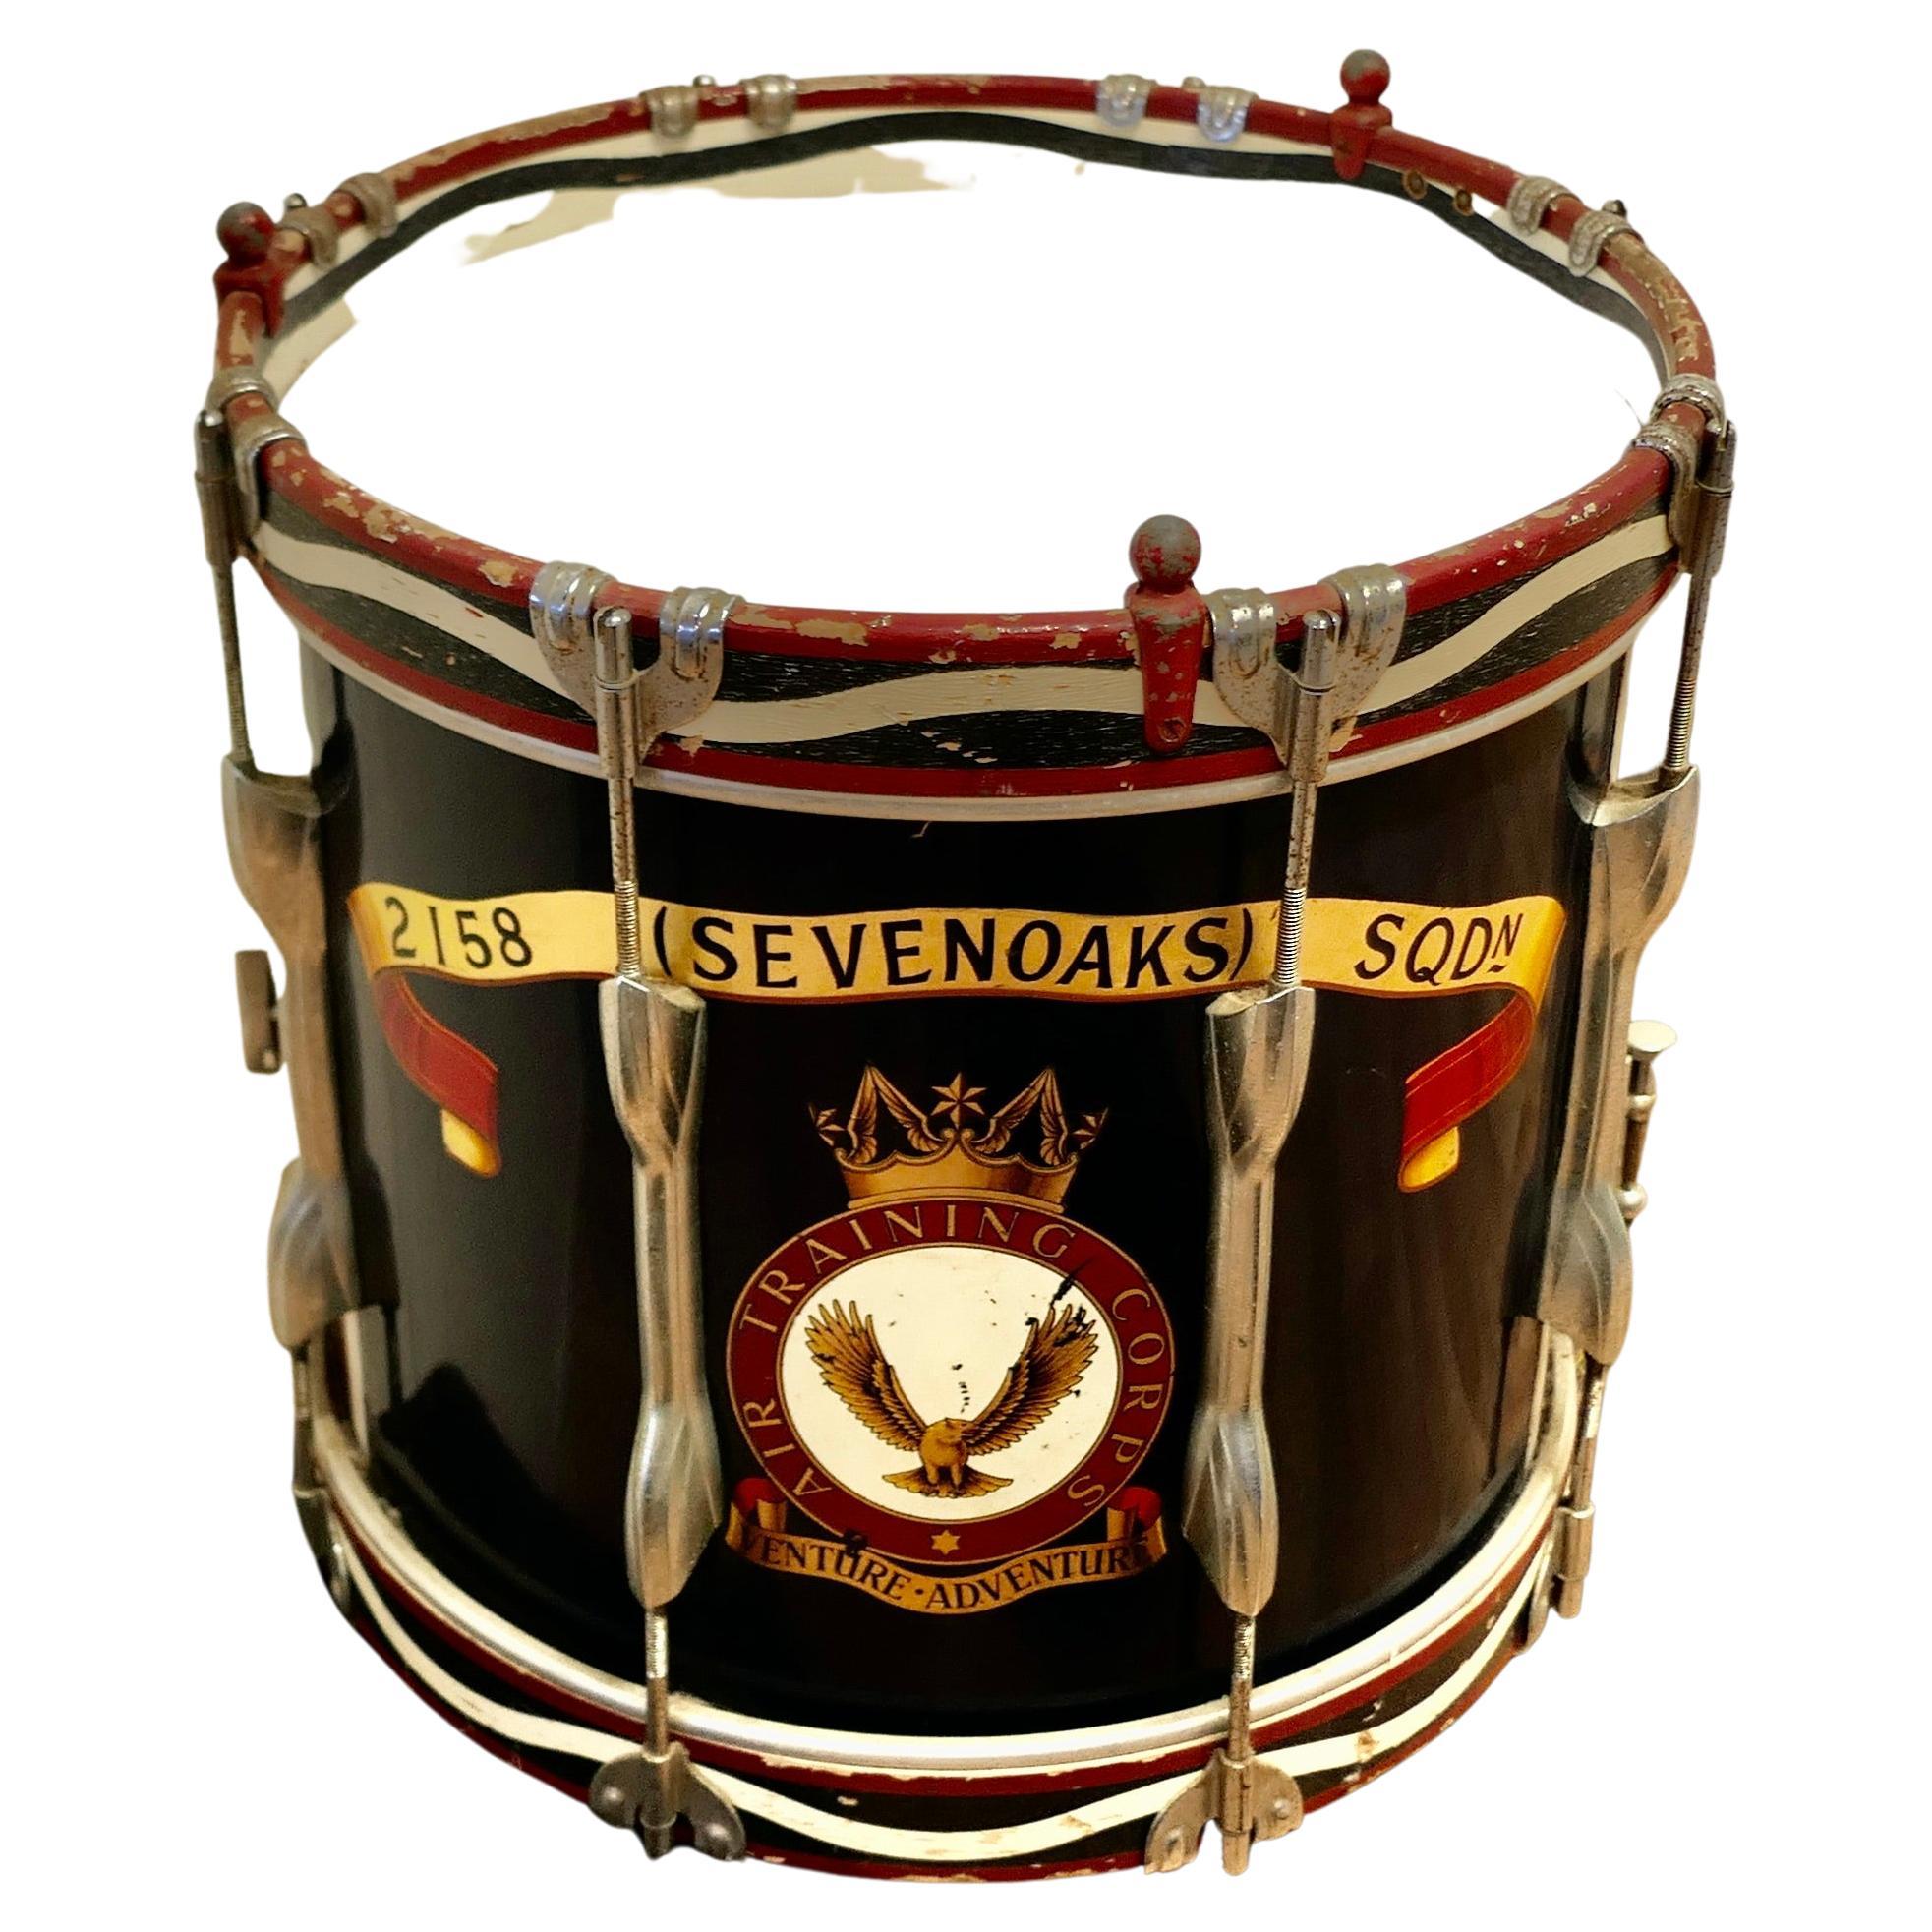 What is a military drum called?